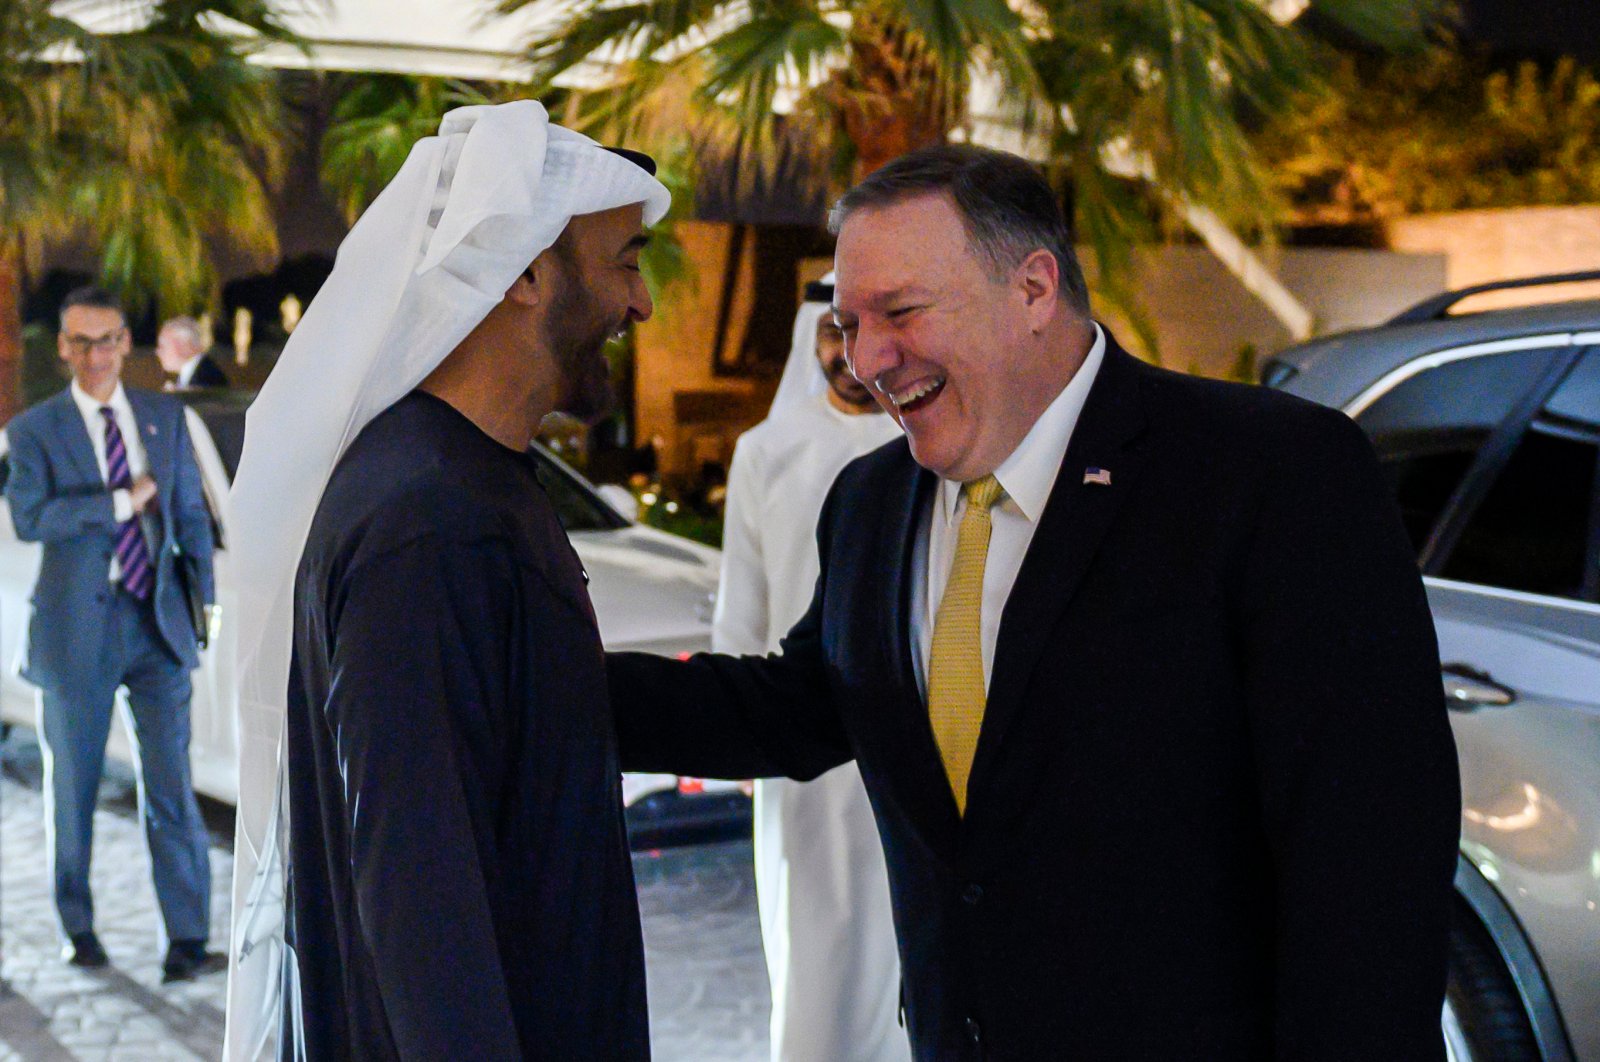 Abu Dhabi's Crown Prince Sheikh Mohammed bin Zayed Al Nahyan greets visiting U.S. Secretary of State Mike Pompeo prior to their meeting at Al-Shati Palace in the UAE capital Abu Dhabi on Jan. 12, 2019. (AP Photo)